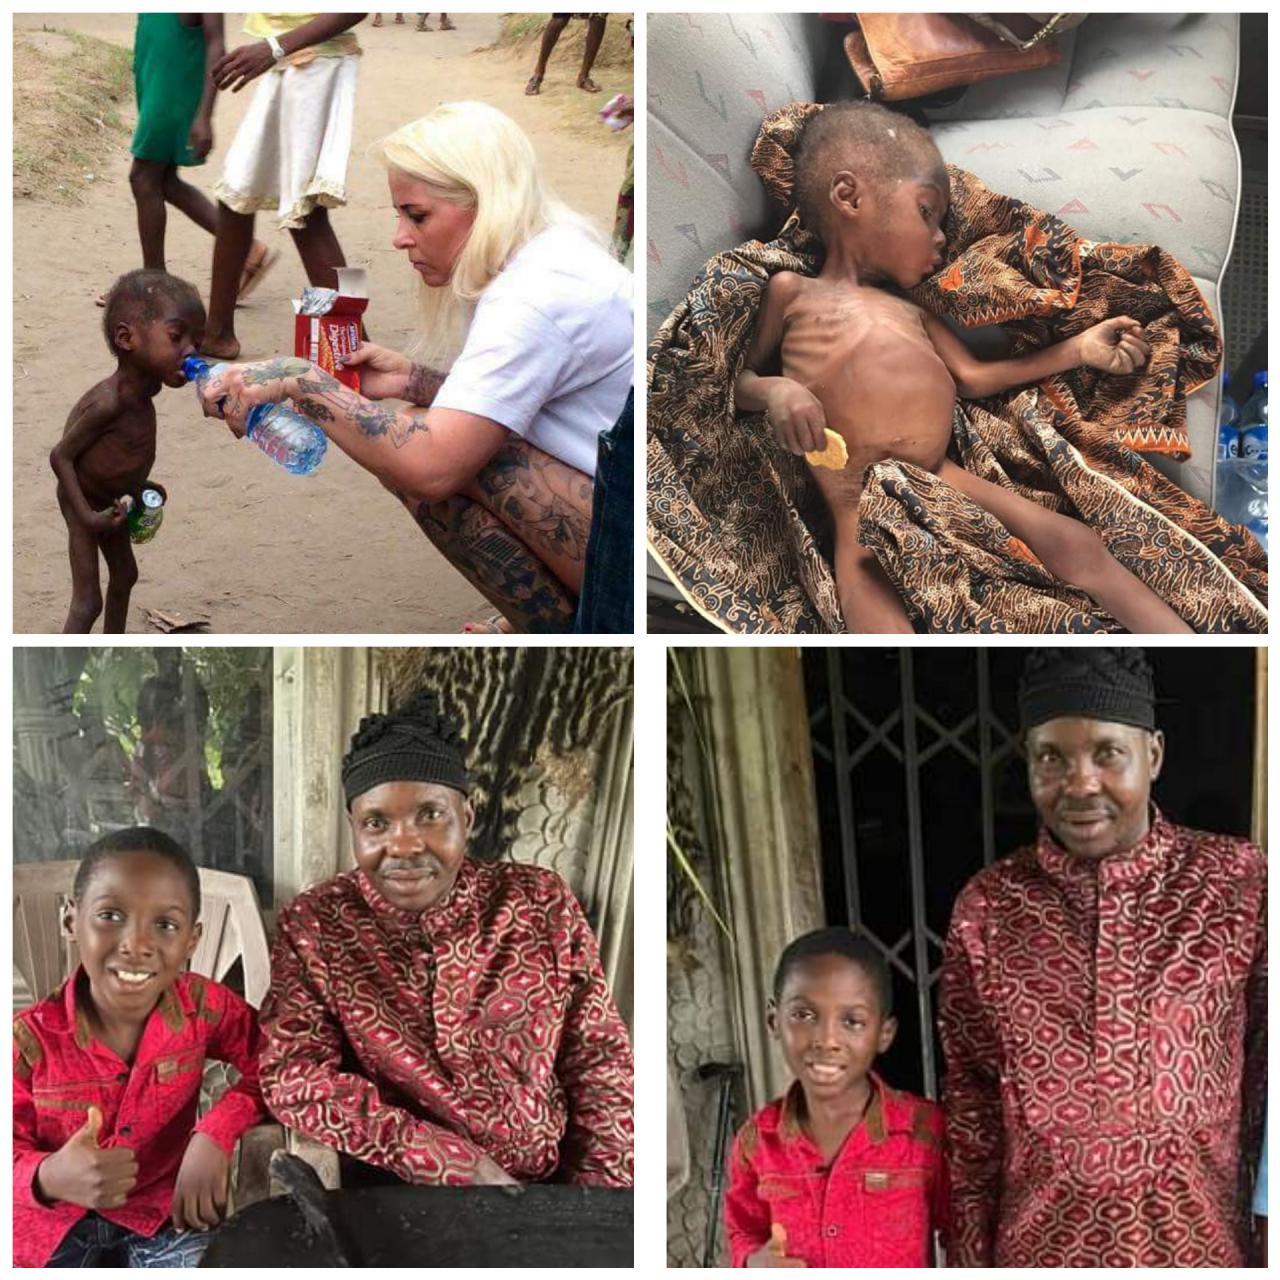 Akwa Ibom boy, Hope reunites with his father six years after he was branded a witch, stigmatized and left to starve to death 